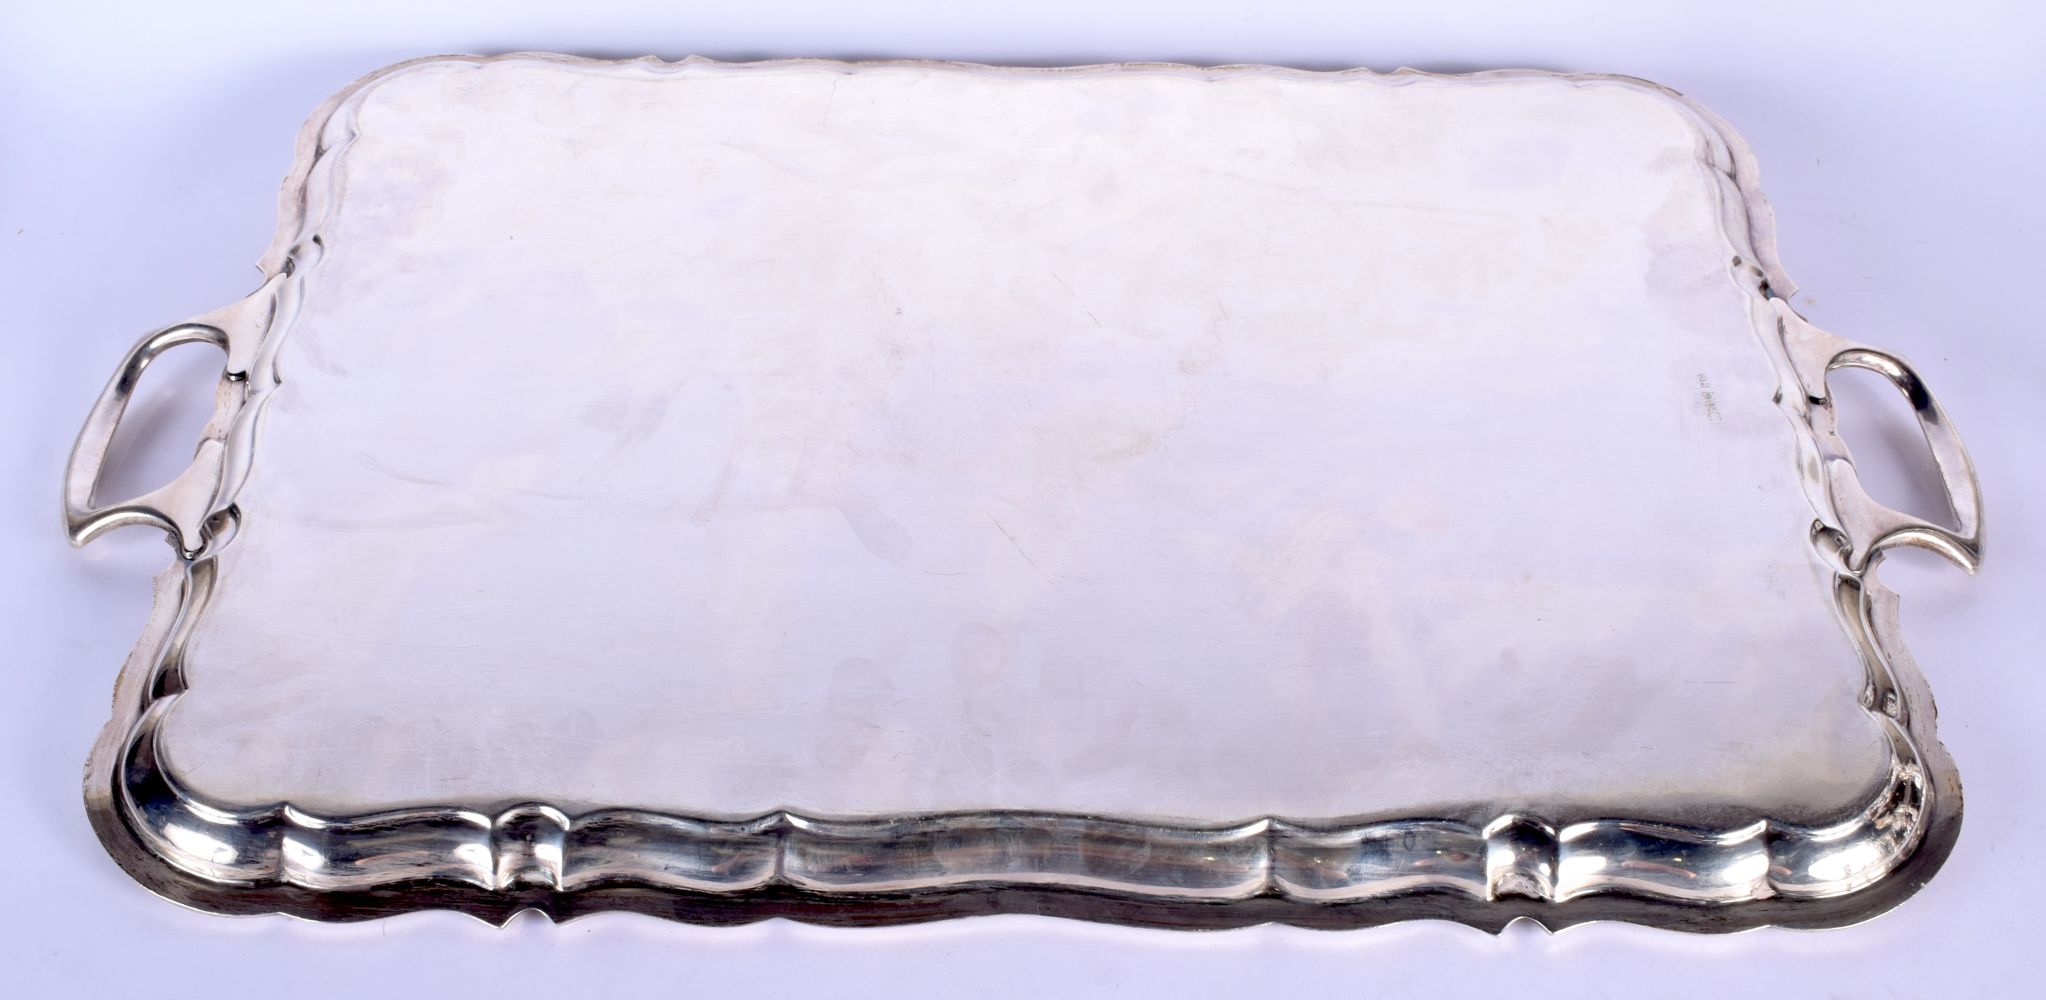 A LARGE TWIN HANDLED SILVER SERVING TRAY. Sheffield 1923. 4188 grams. 69 cm x 42 cm. - Image 2 of 3